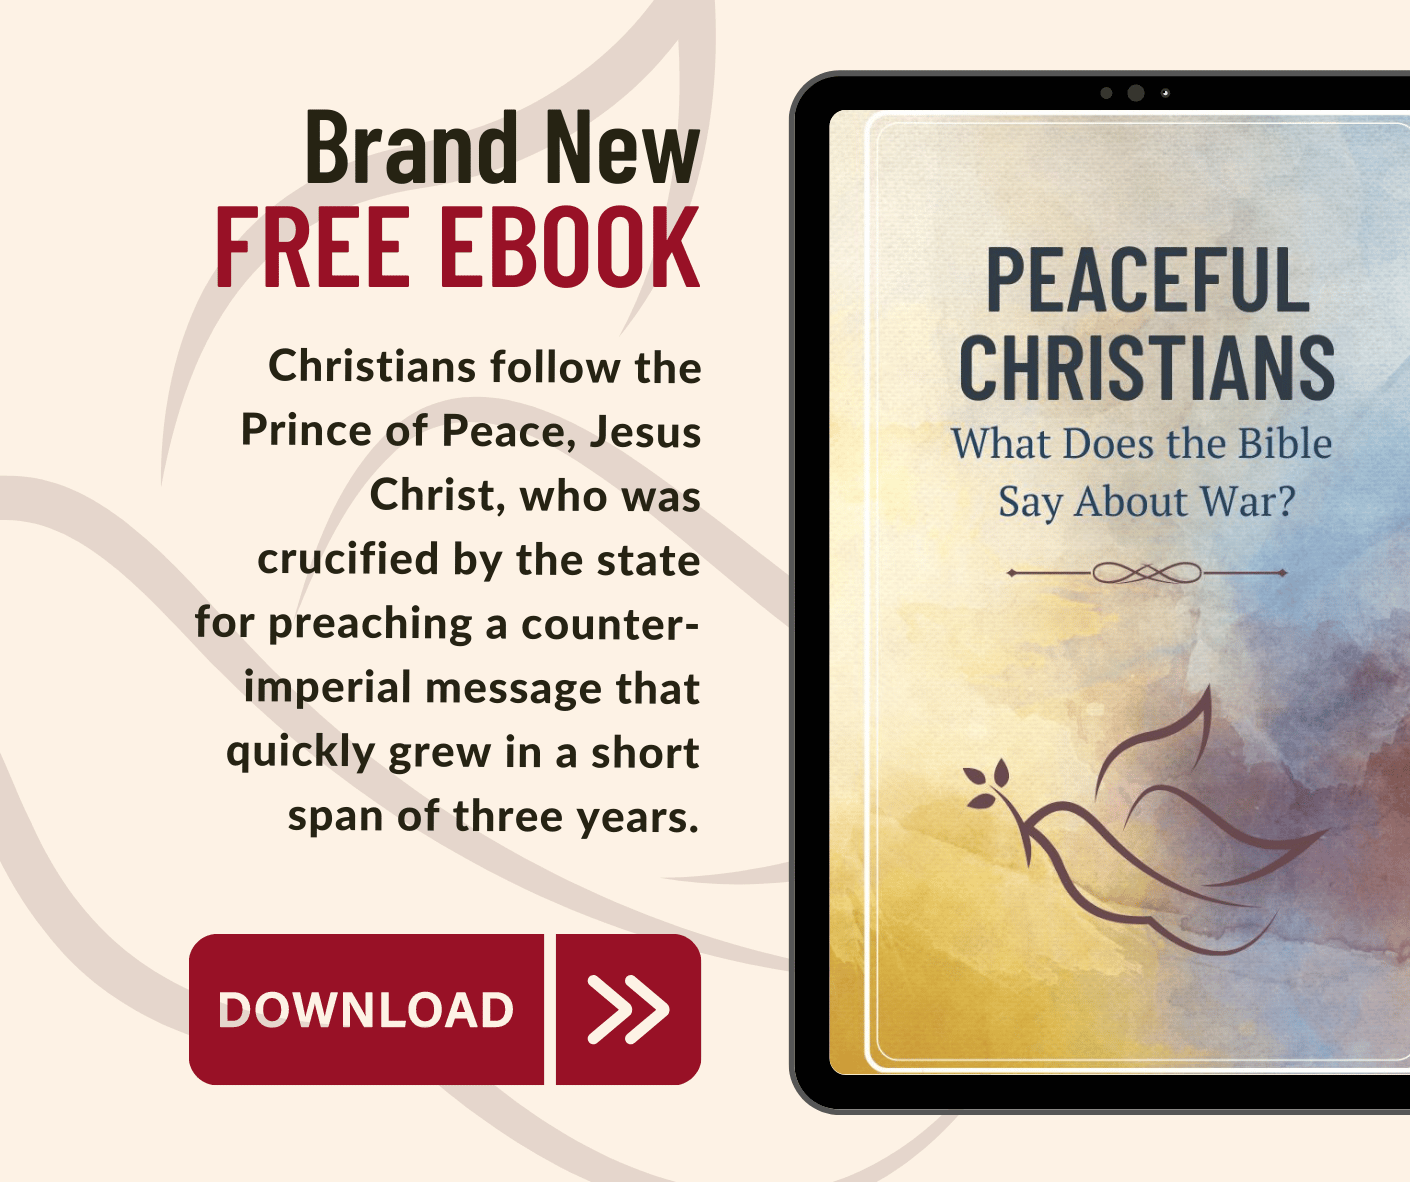 A Free Ebook for All ‘Peaceful Christians’